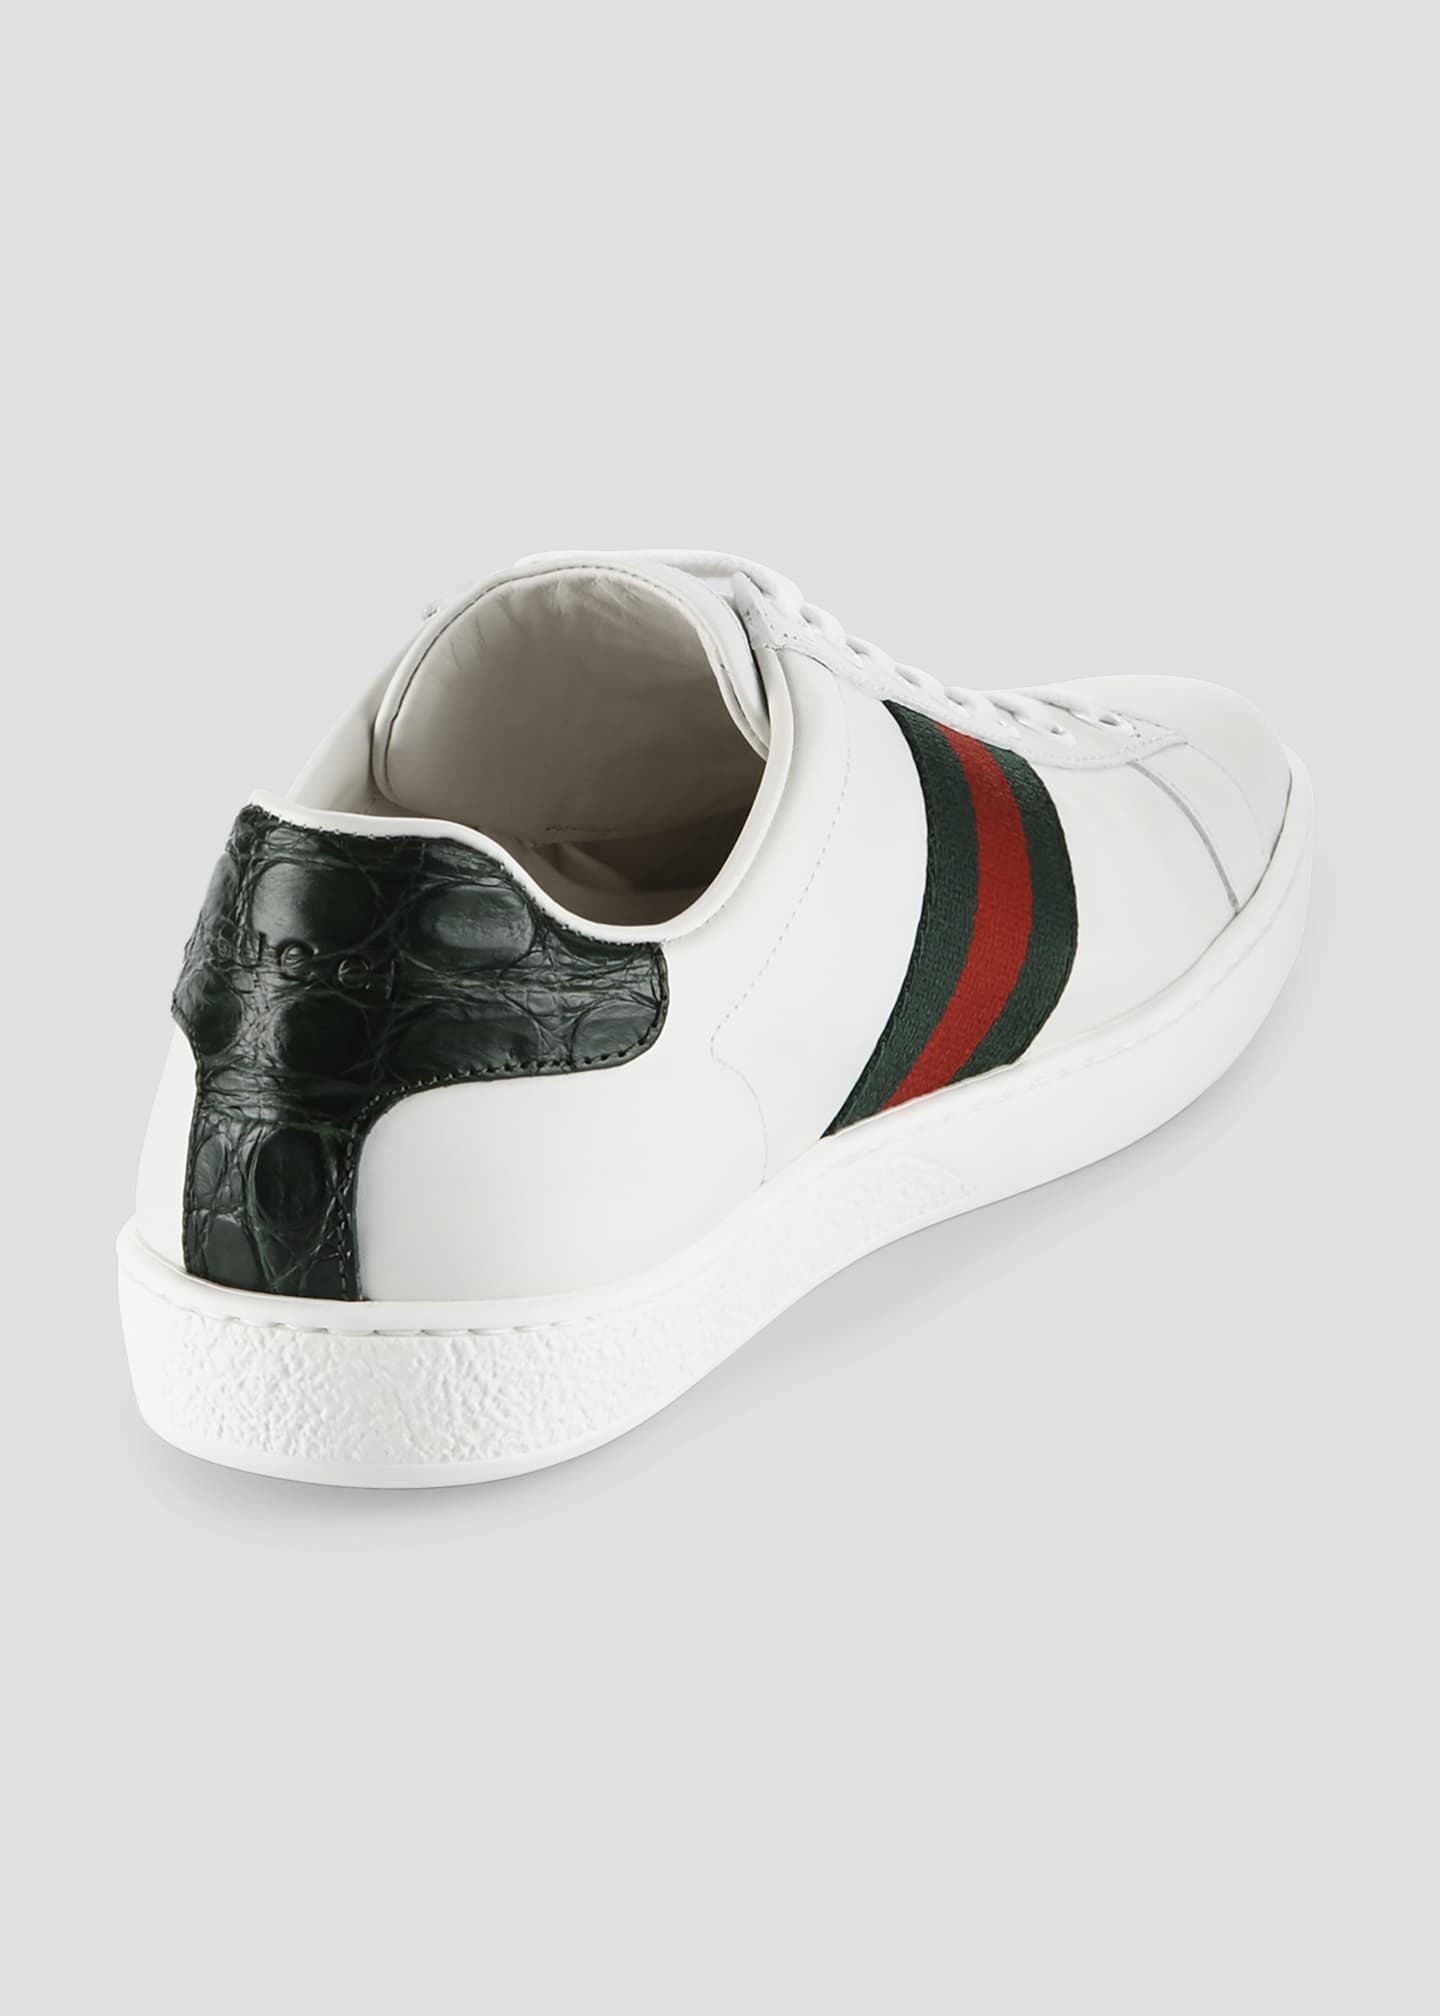 Gucci Ace Star & Bee Sneakers Image 4 of 5